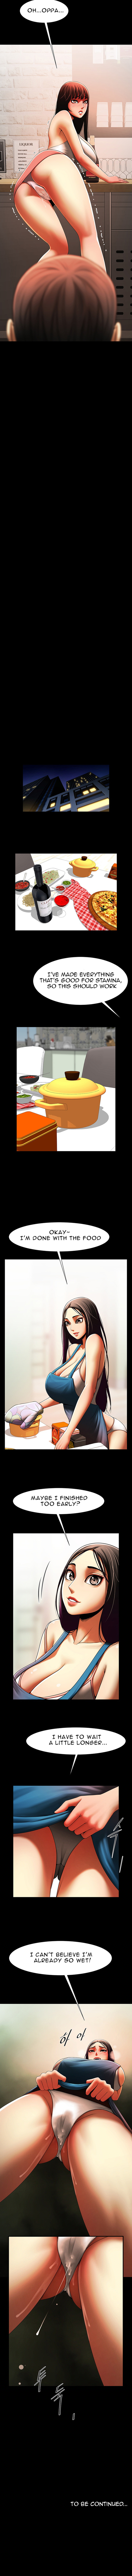 The Woman Who Lives In My Room - Chapter 23 Page 5